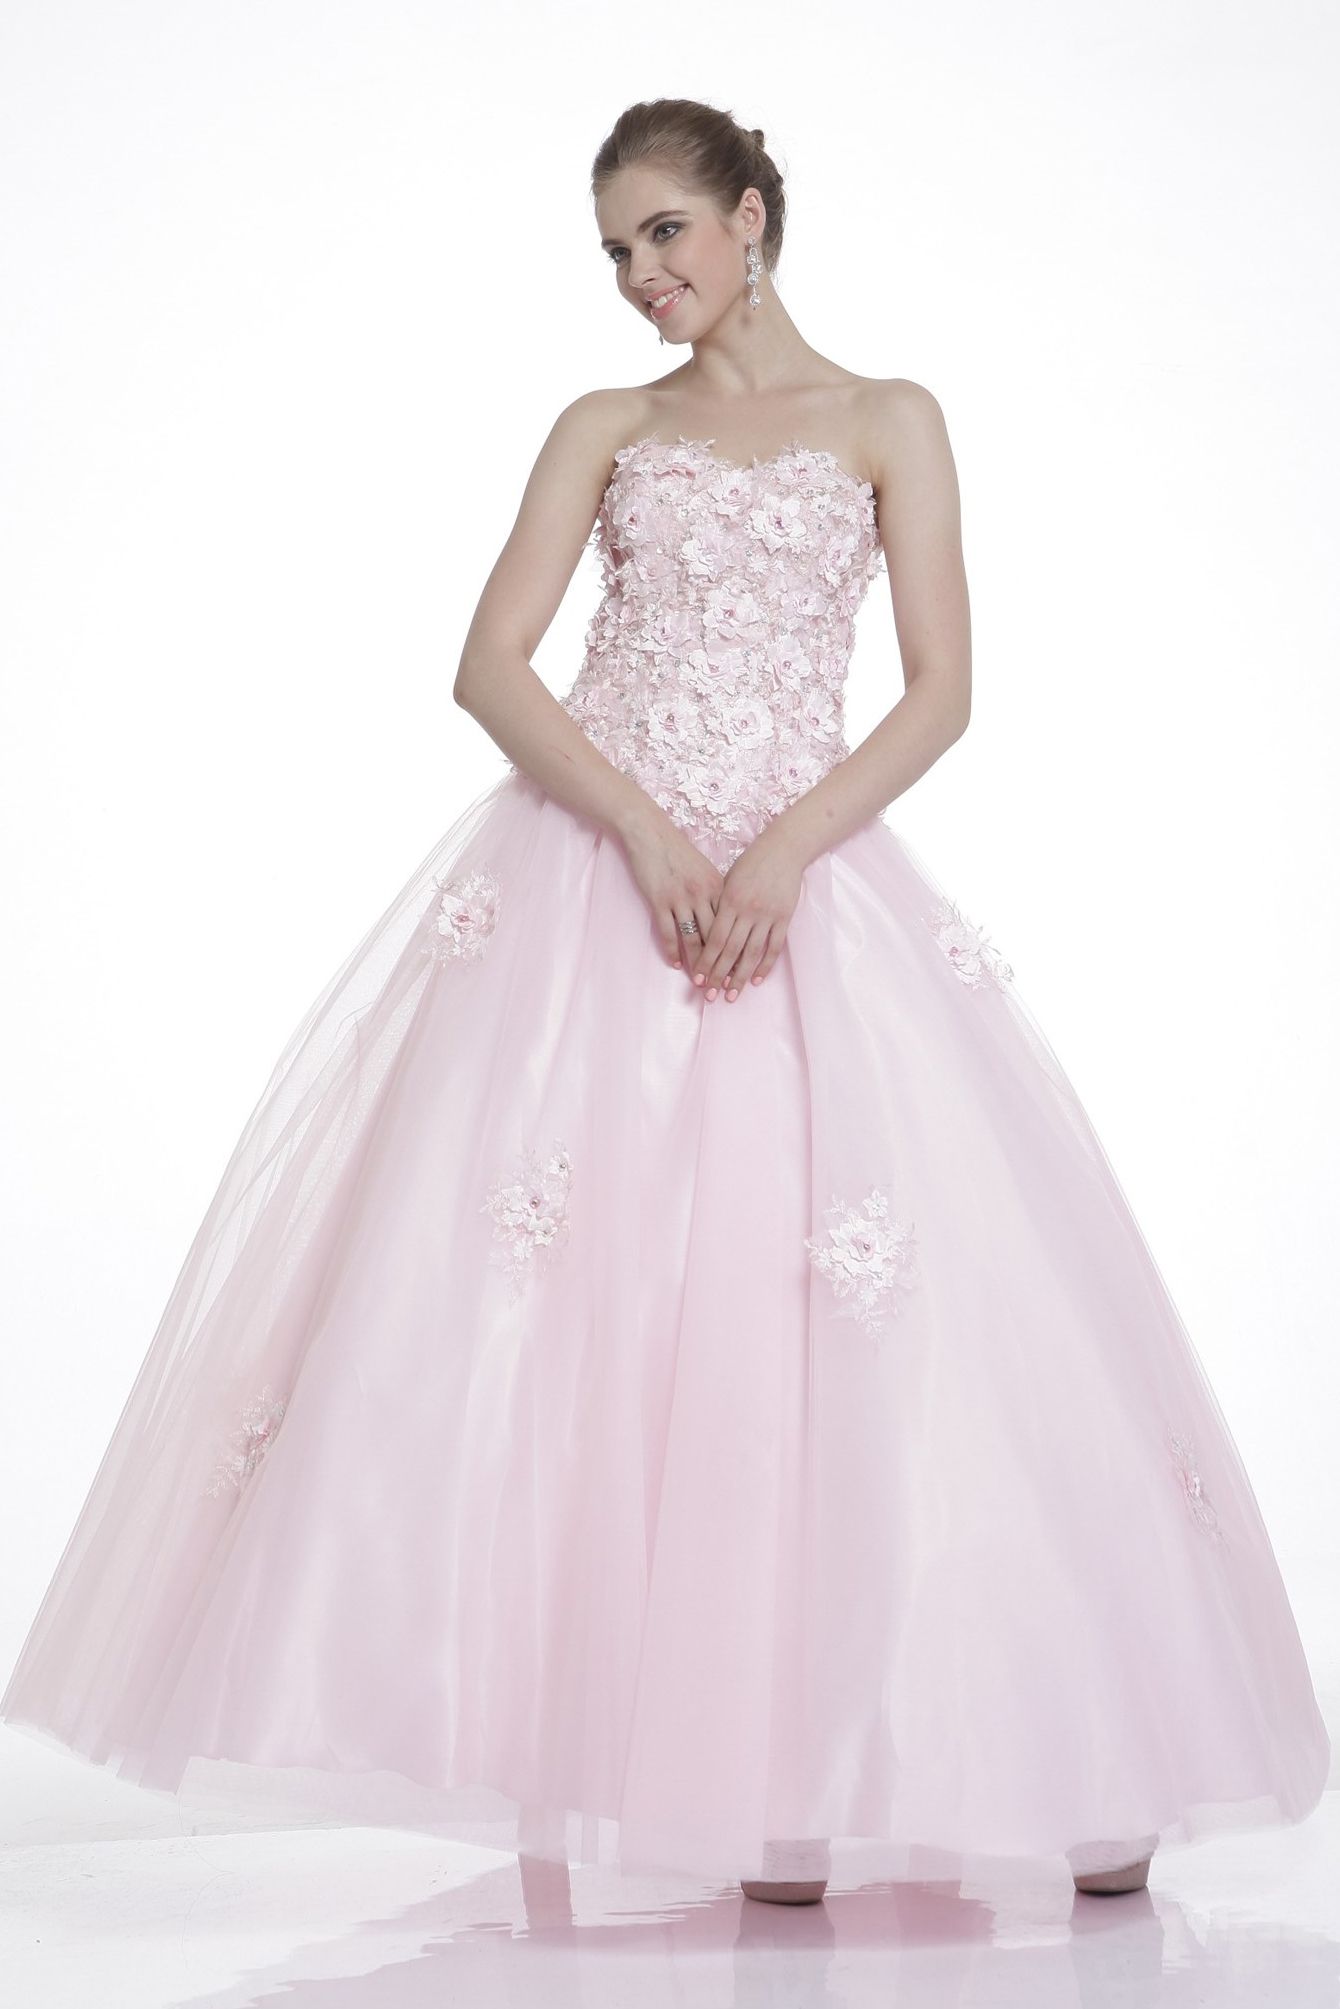 Beaded Flower Applique Tulle Ball Gown-smcdress